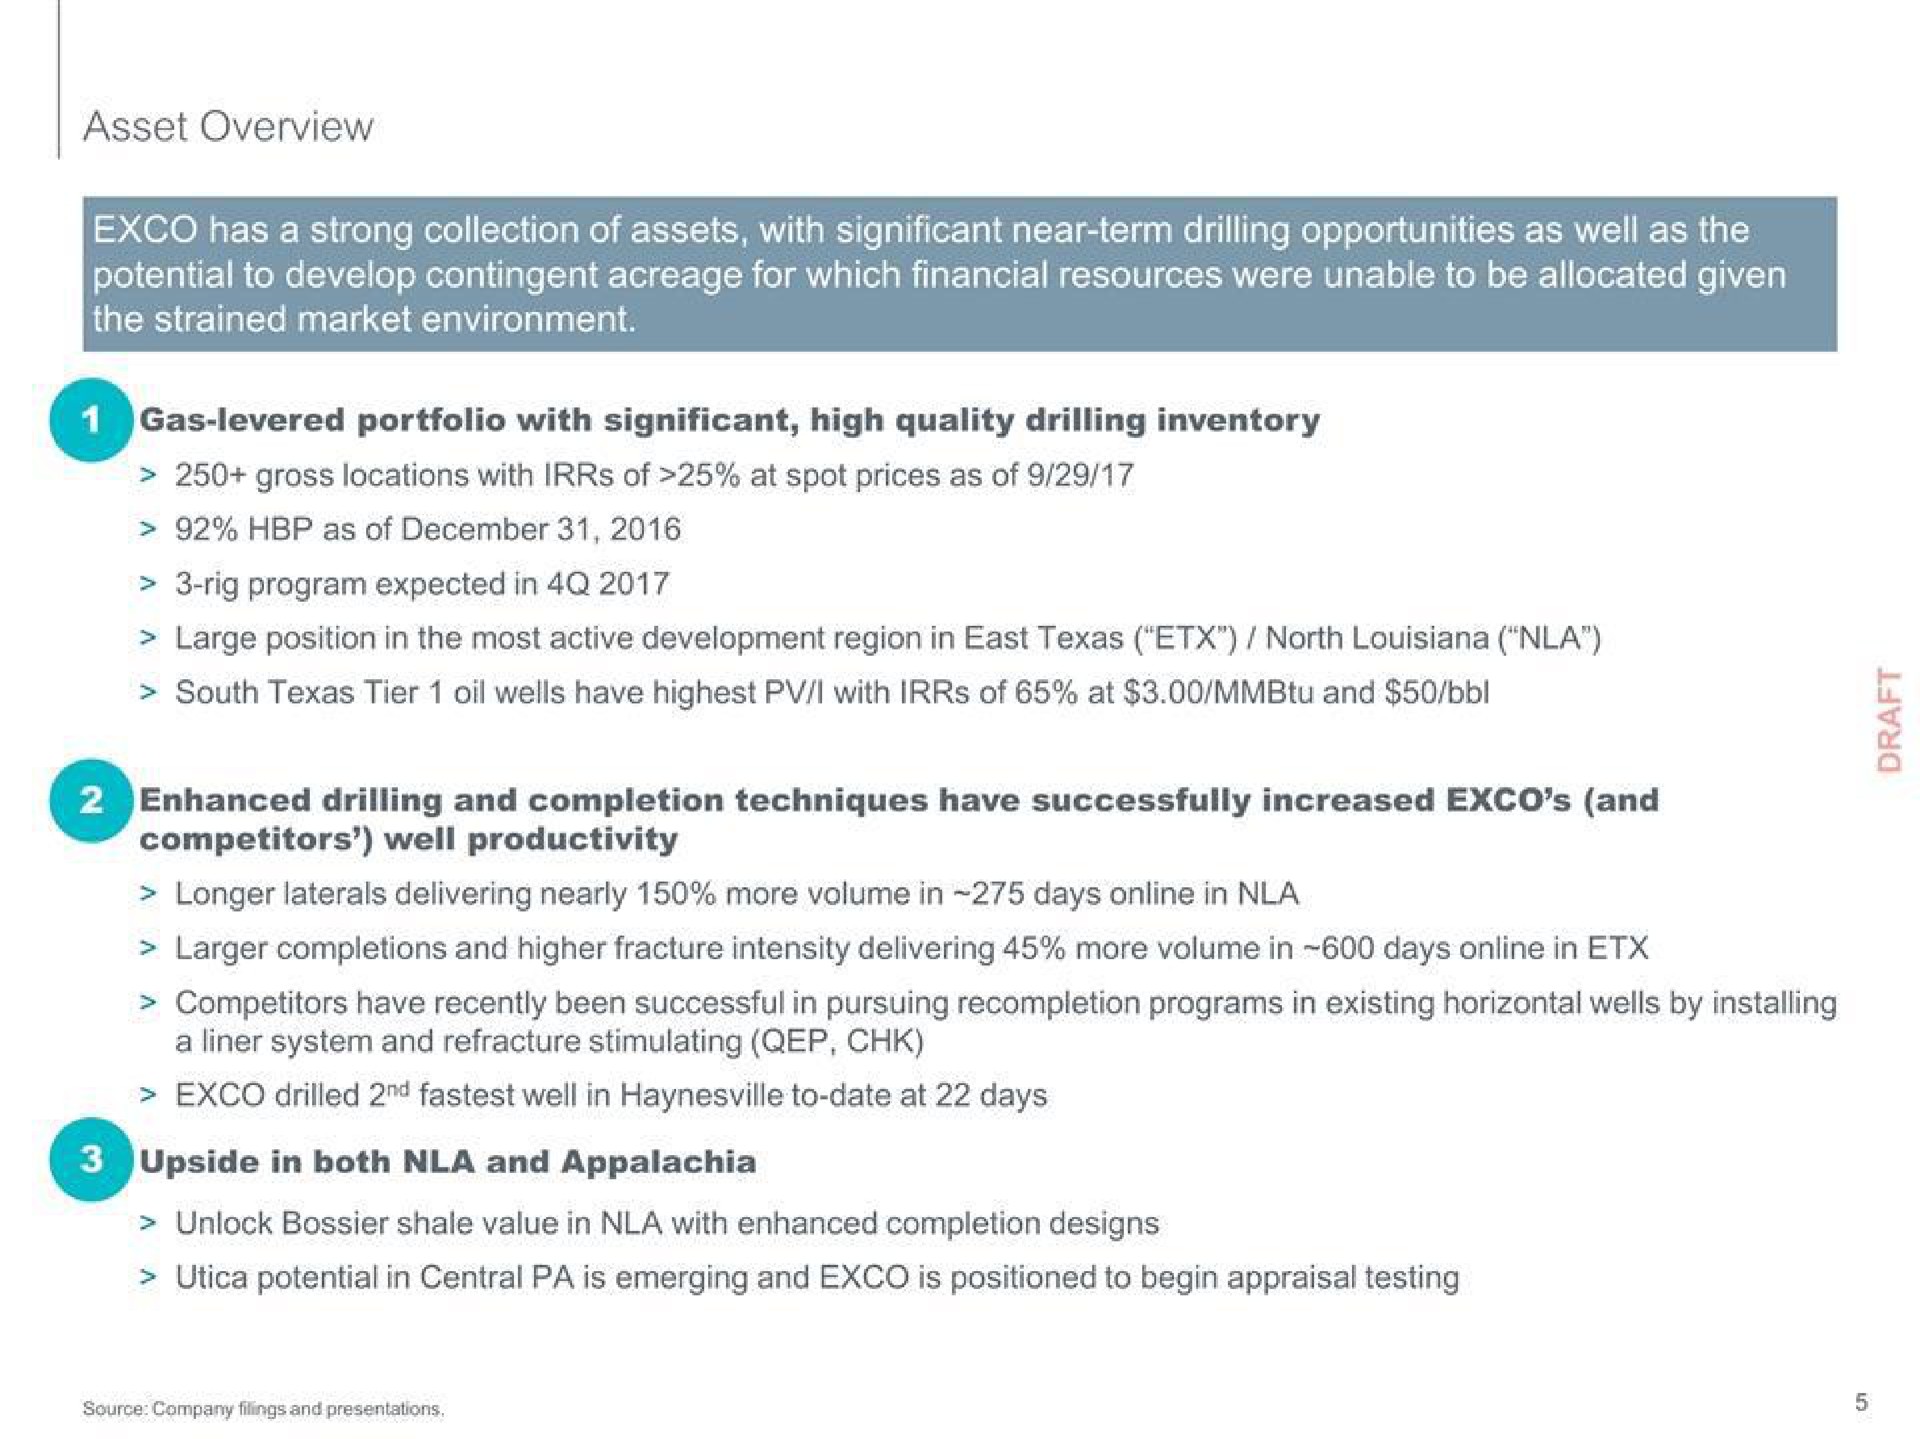 asset overview has a strong collection of assets with significant near term drilling opportunities as well as the potential to develop contingent acreage for which financial resources were unable to be allocated given the strained market environment | PJT Partners